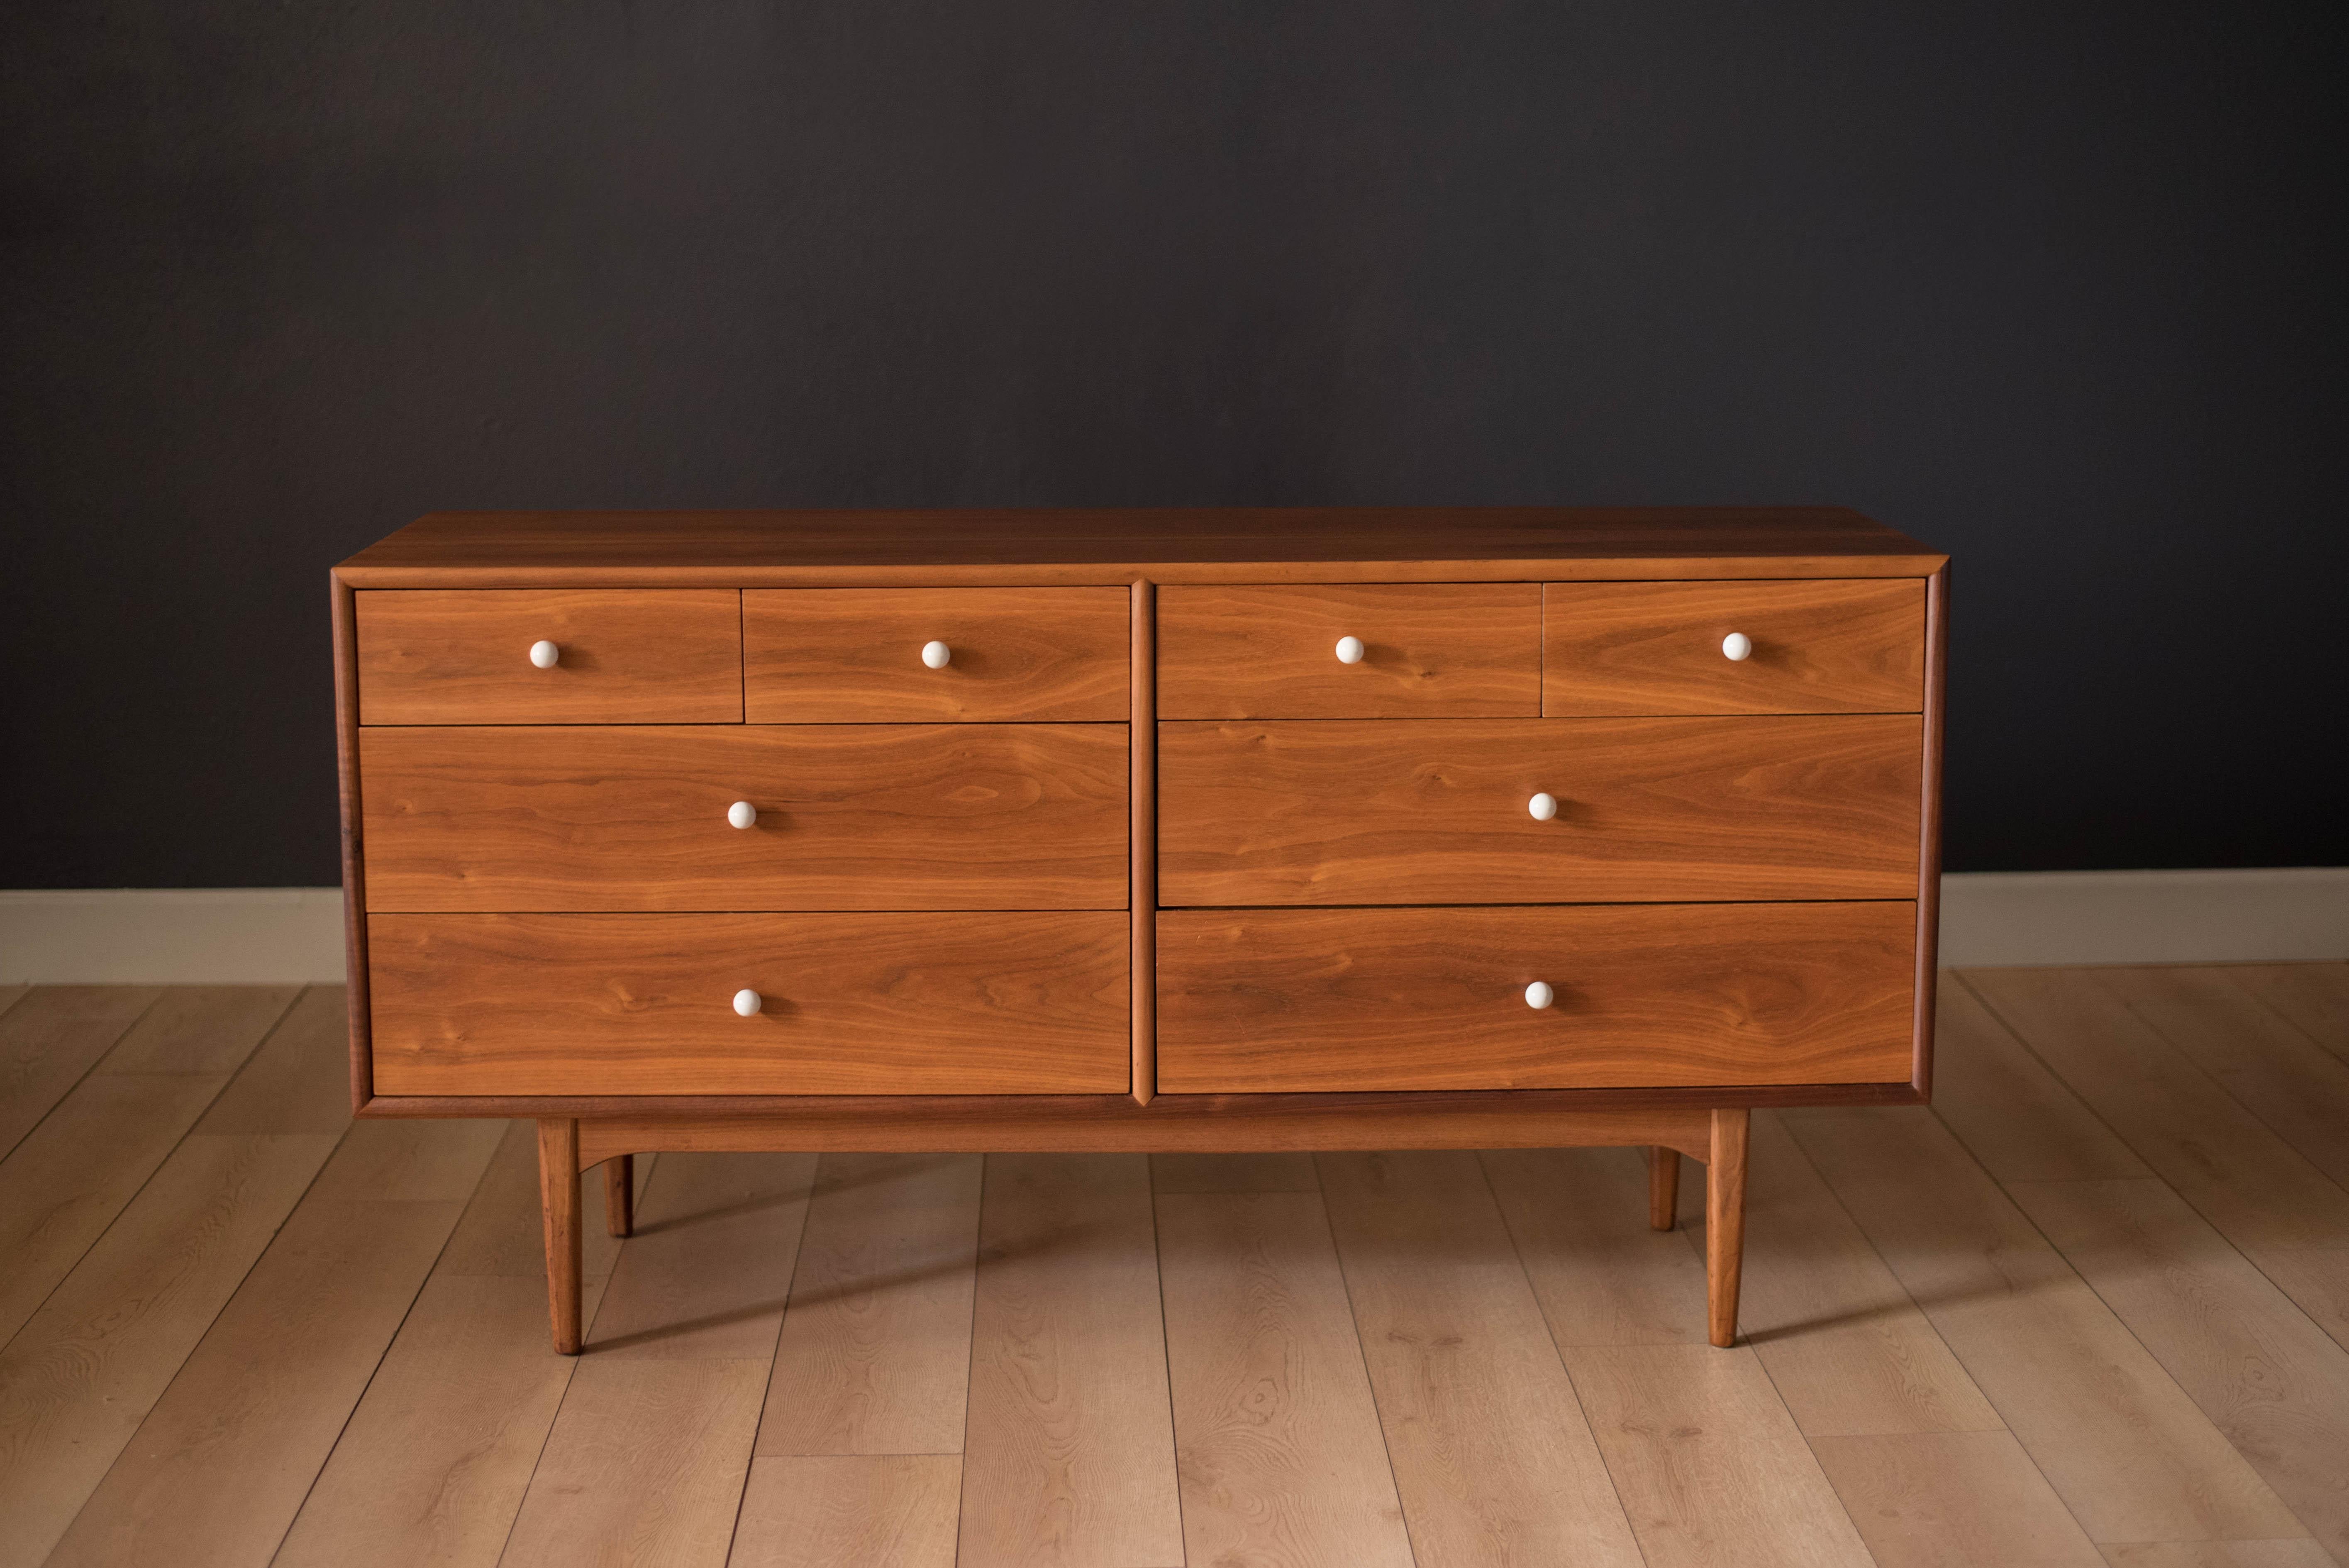 Mid century Drexel declaration low dresser by Kipp Stewart & Stewart McDougall. This piece features bookmatched black walnut grains equipped with the collection's signature porcelain knobs. Includes plenty of storage with eight dovetailed drawers.